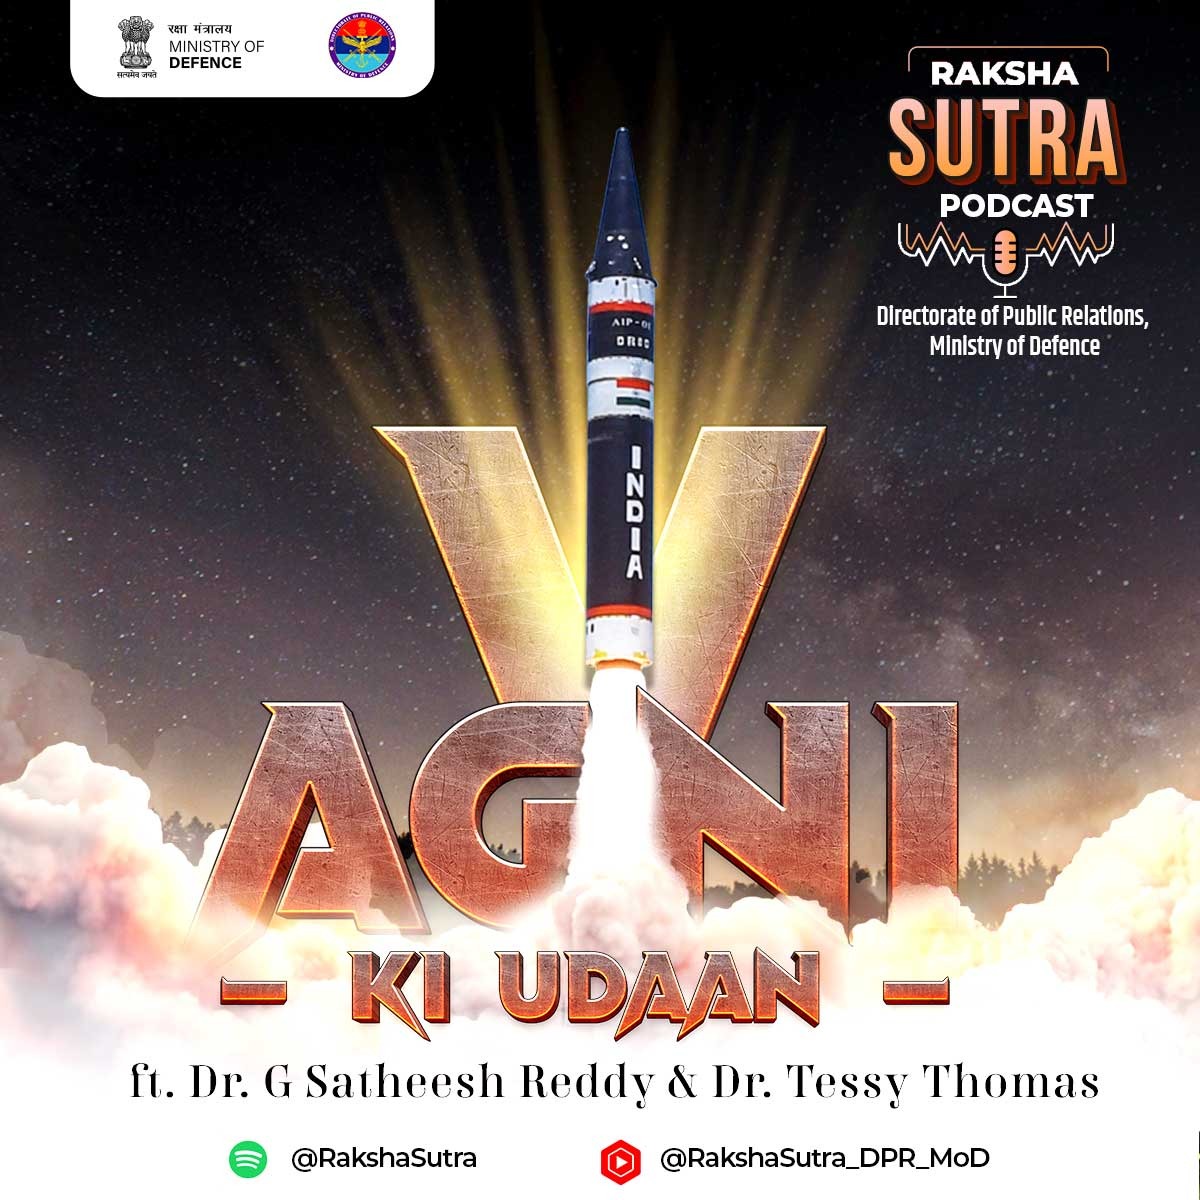 In today's episode of our podcast Raksha Sutra, Agni Ki Udaan, listen to the success story of @DRDO's Agni V missile maiden flight with new technology MIRV, as top missile scientists Dr G Satheesh Reddy & Dr Tessy Thomas explain what makes it a force-multiplier. (1/2)